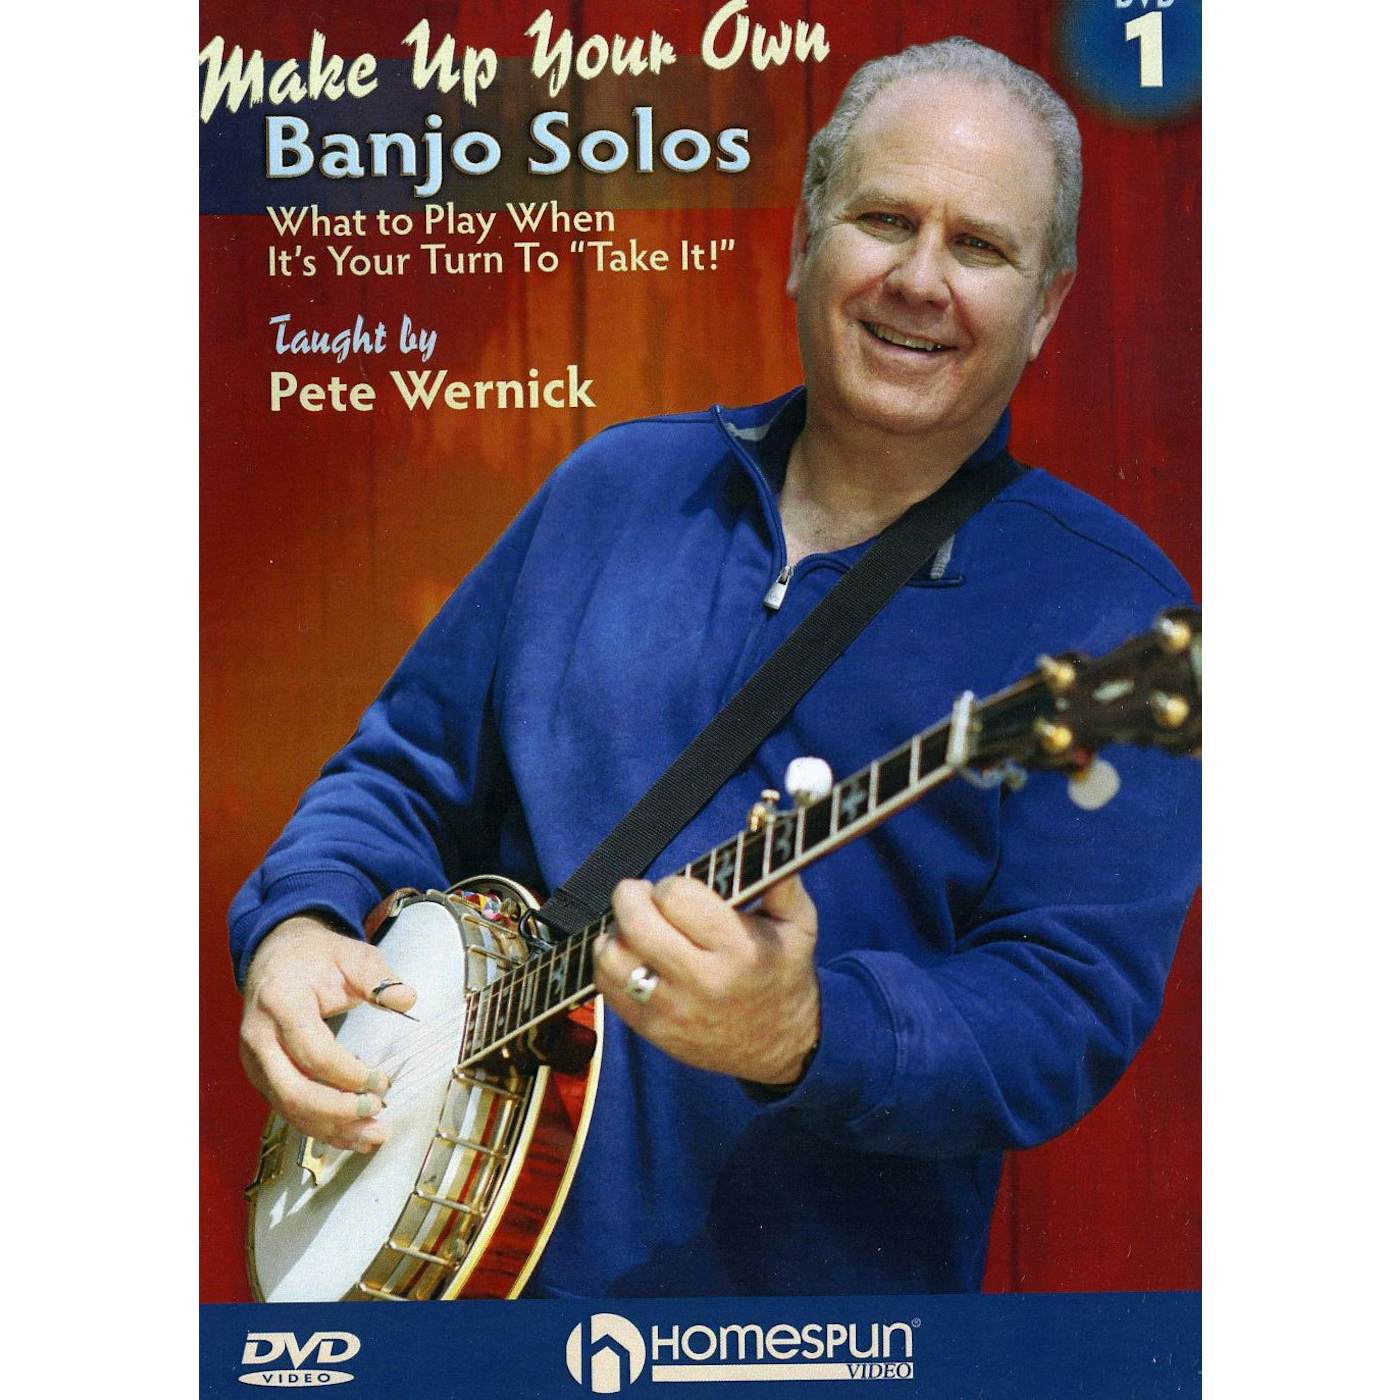 Pete Wernick MAKE UP YOUR OWN BANJO SOLOS DVD